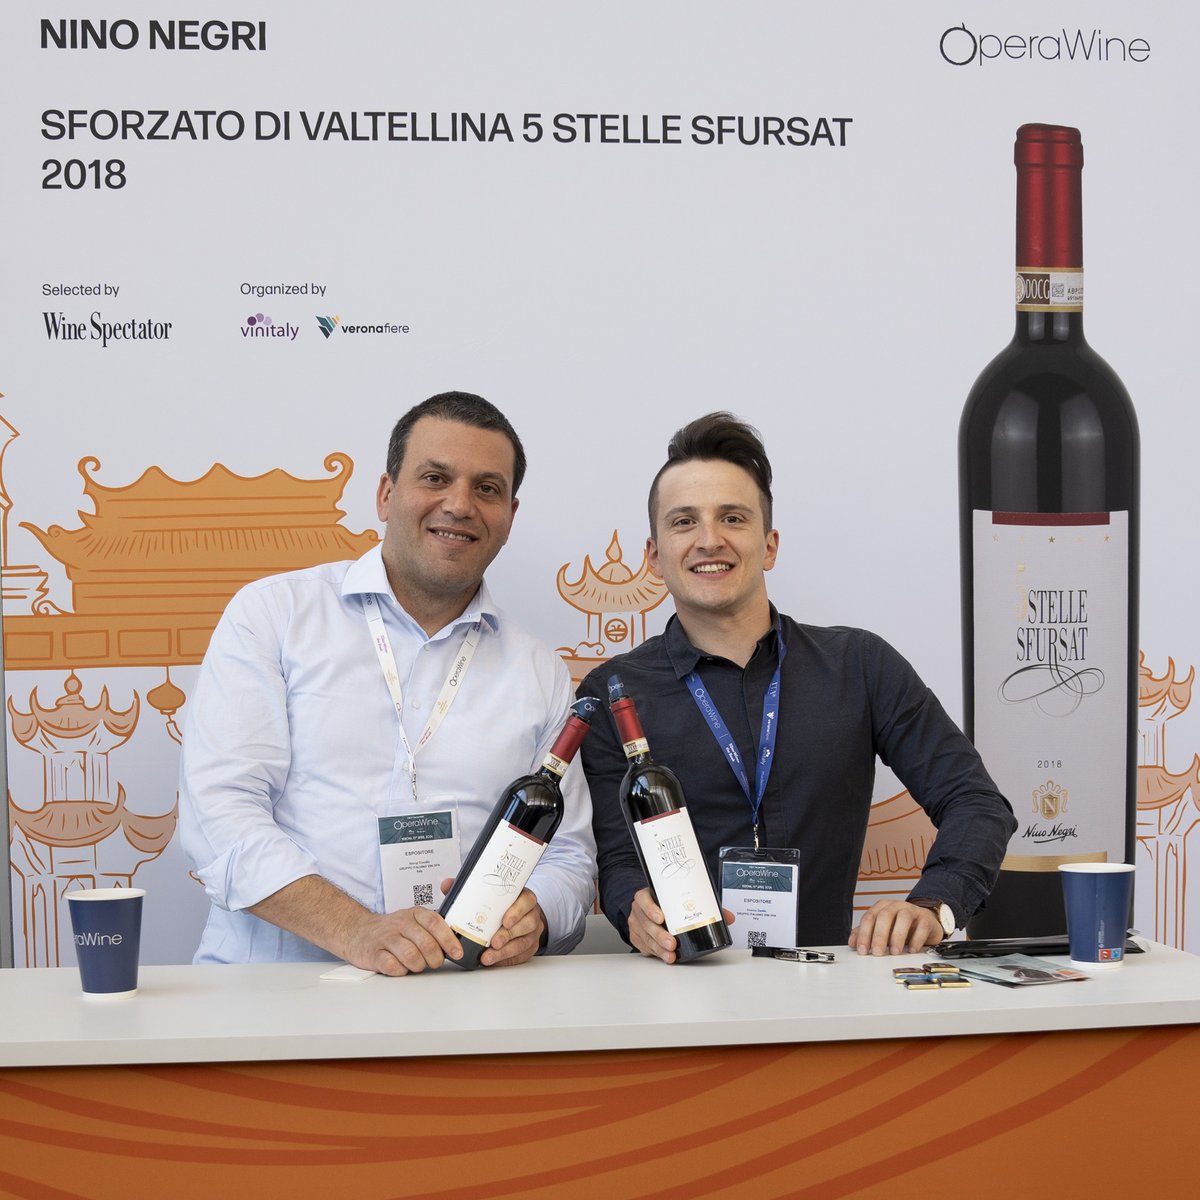 Here is the portrait of Nino Negri, one of the great Italian producers selected by Wine Spectator for #OperaWine2024. During this year's Grand Tasting, they shared with guests their Sforzato di Valtellina 5 Stelle Sfursat 2018. Congratulations! #Vinitaly2024 #finestitalianwines